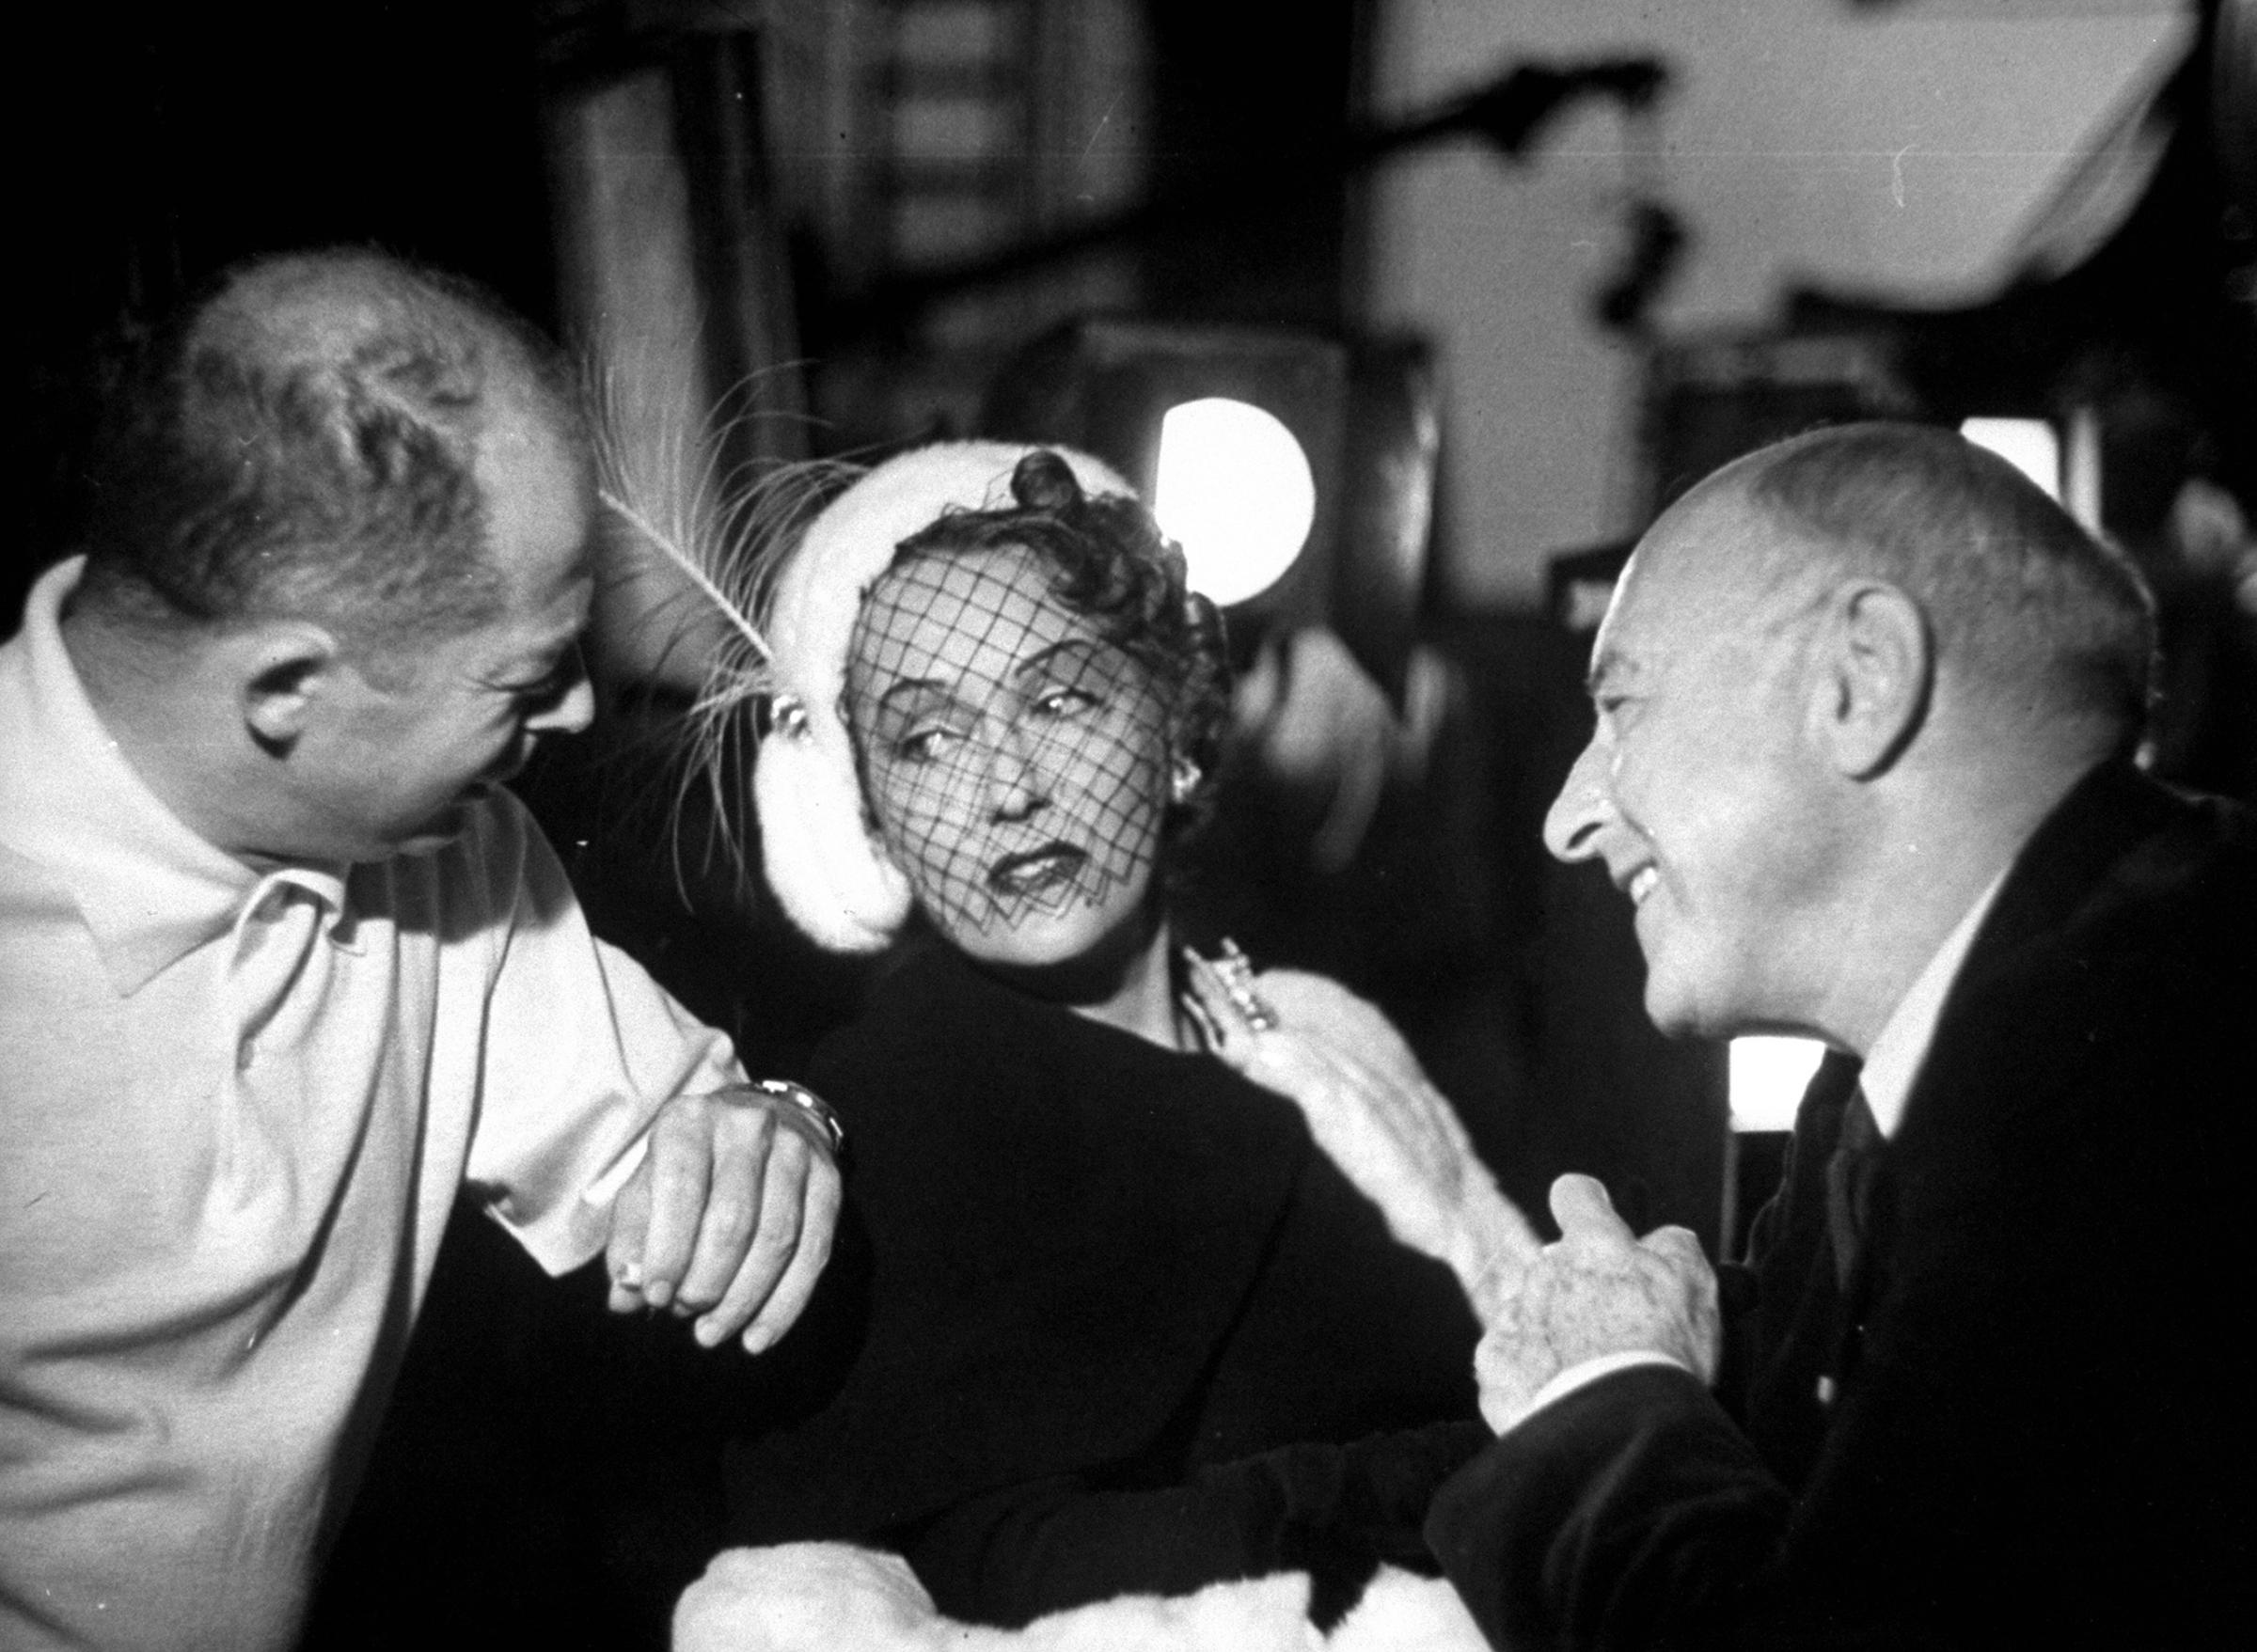 Billy Wilder, Gloria Swanson and Cecil B. Demille during the filming of "Sunset Blvd."in 1949.